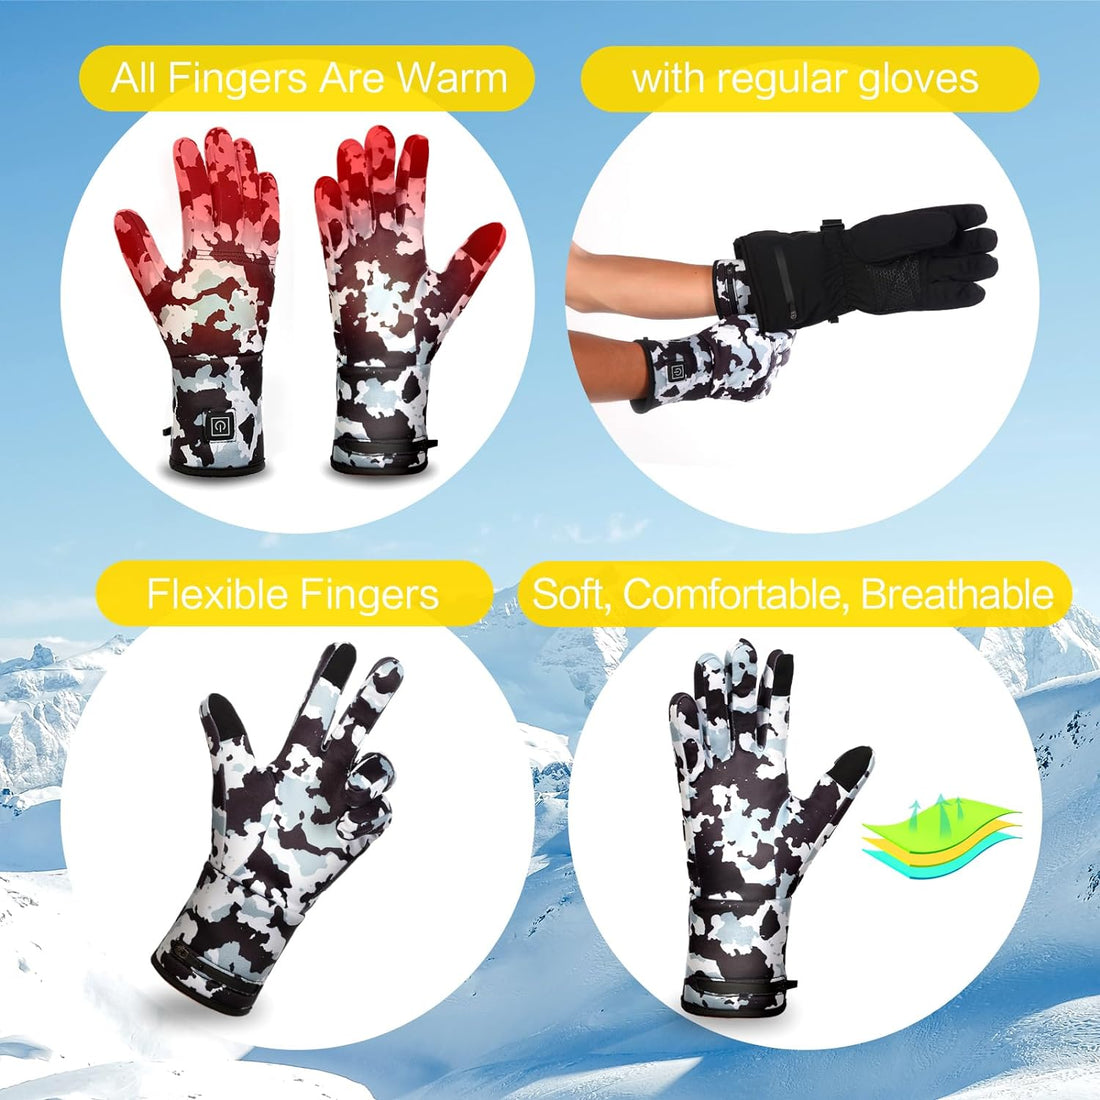 Heated Glove Liners for Men Women, Rechargeable Hand Warmers, Thin Camouflage Touchscreen Battery Electric Gloves Liner